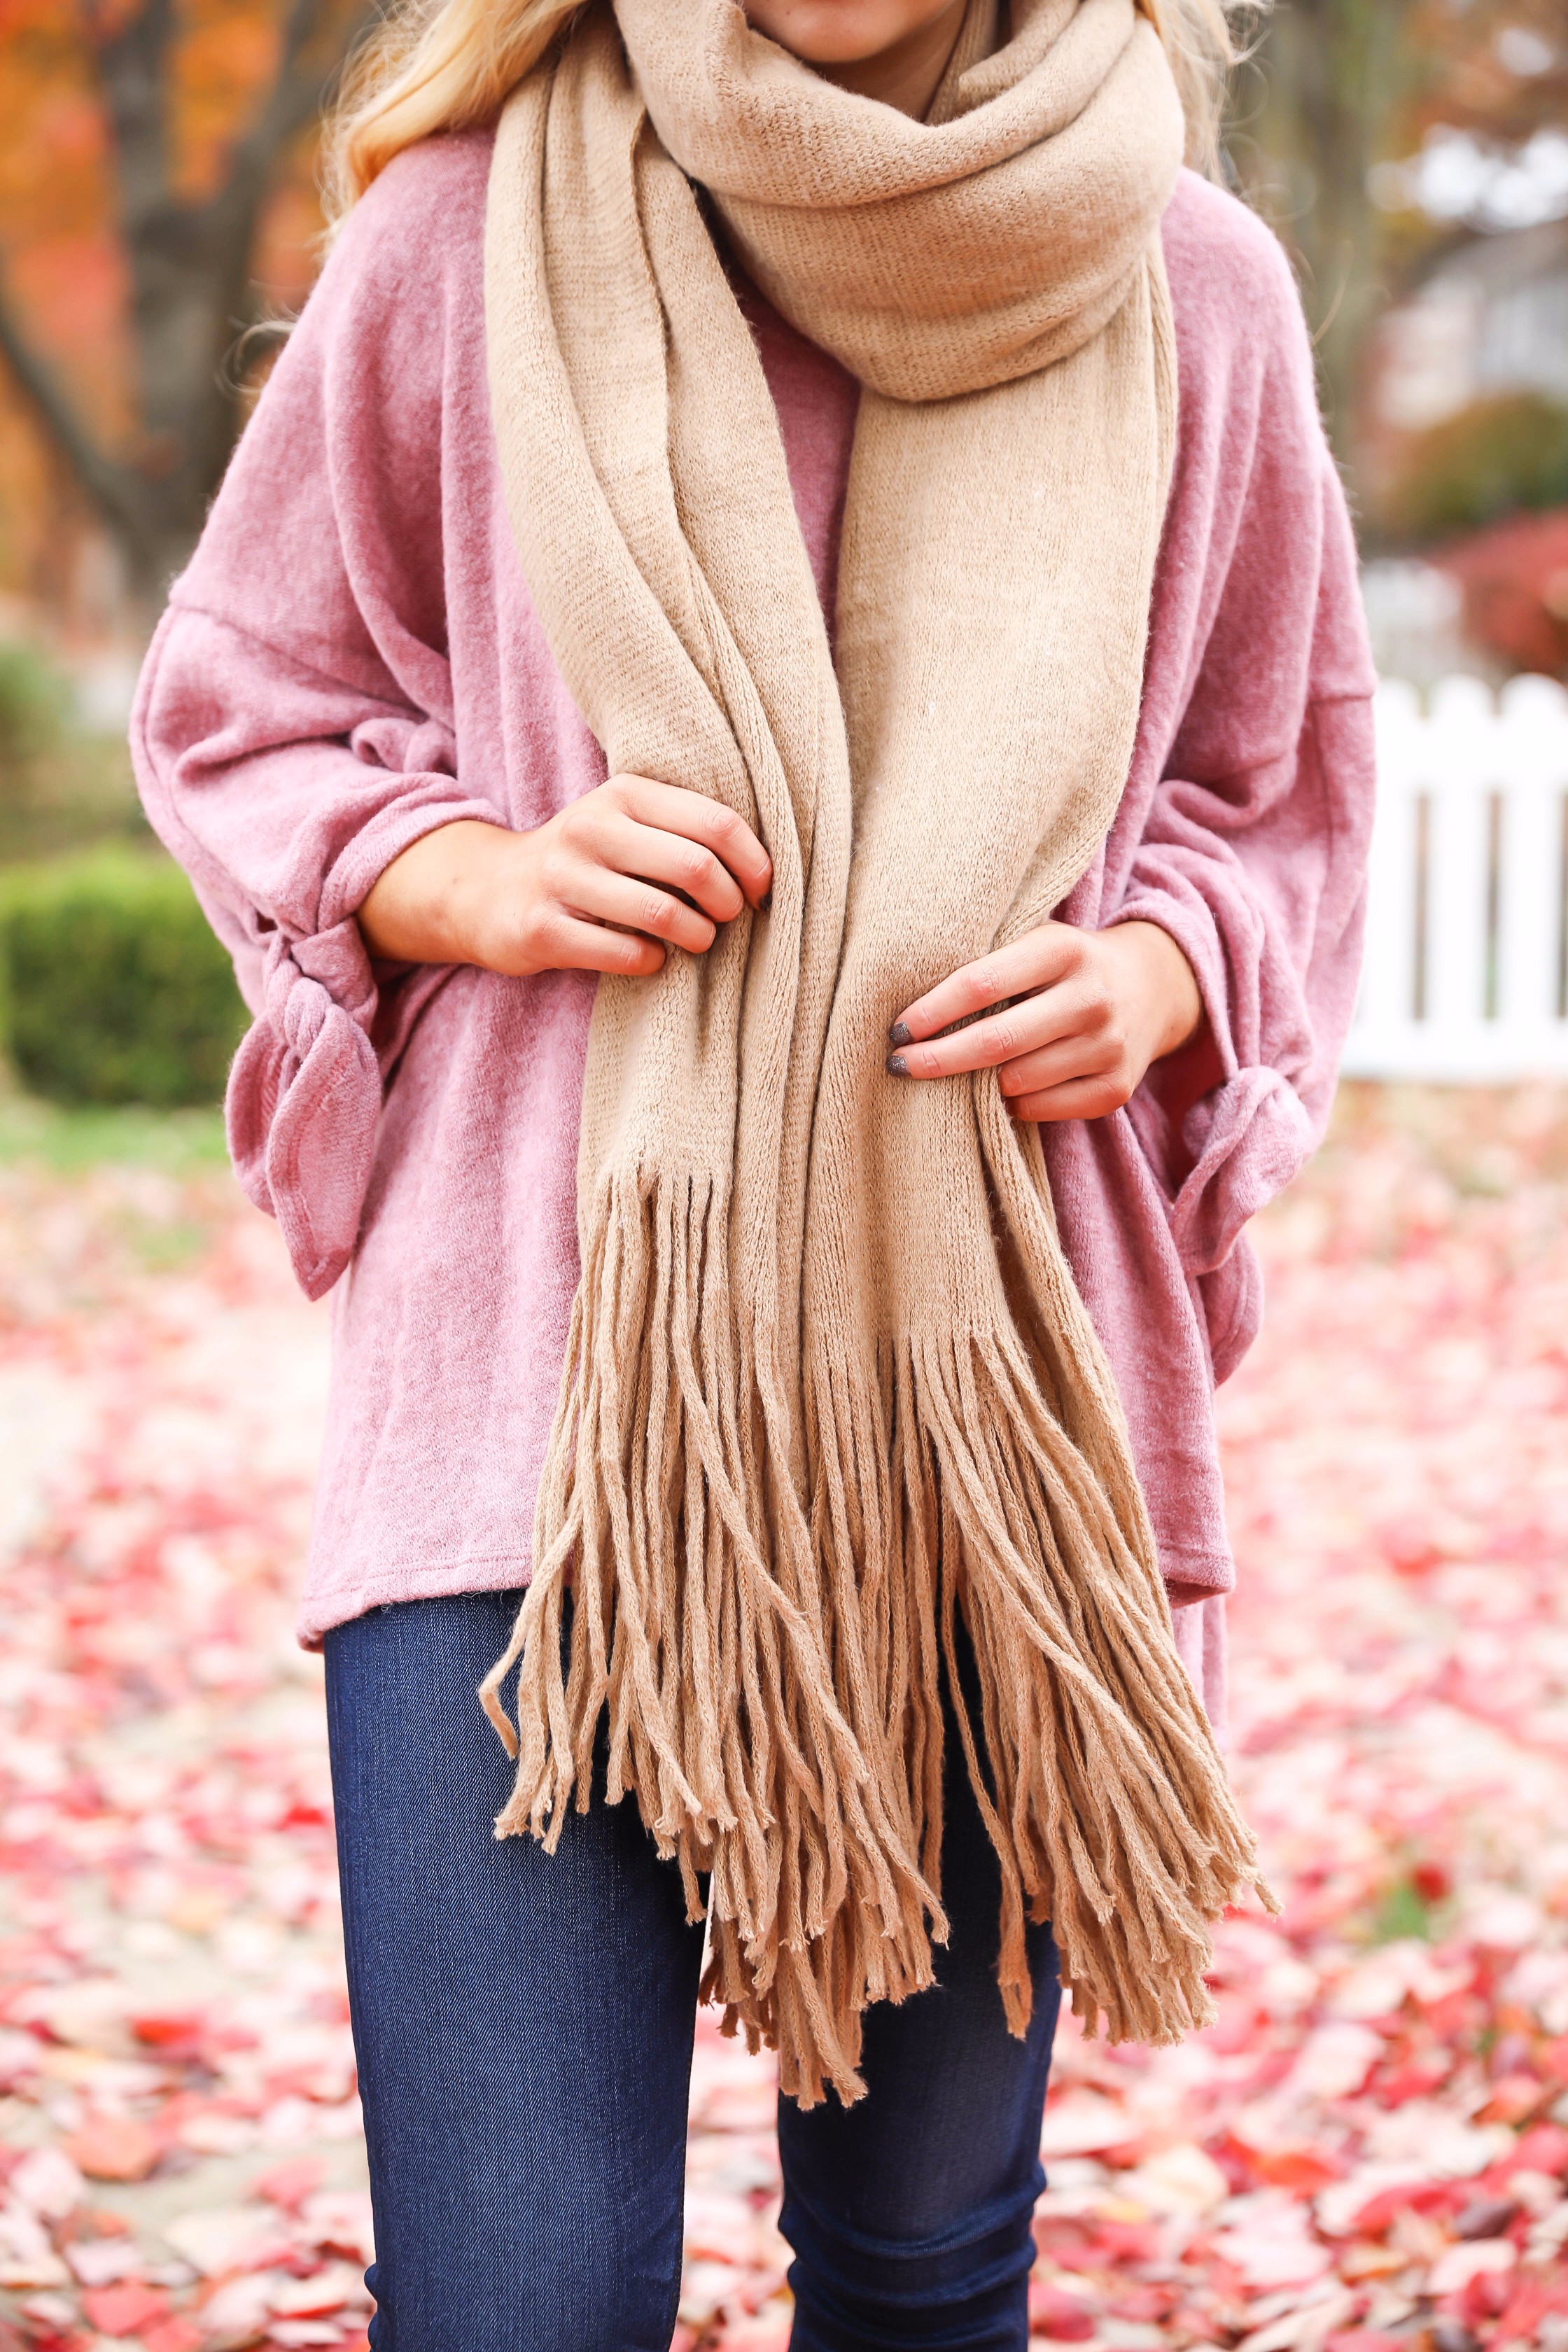 Pink Cozy Outfit + My Favorite Scarf